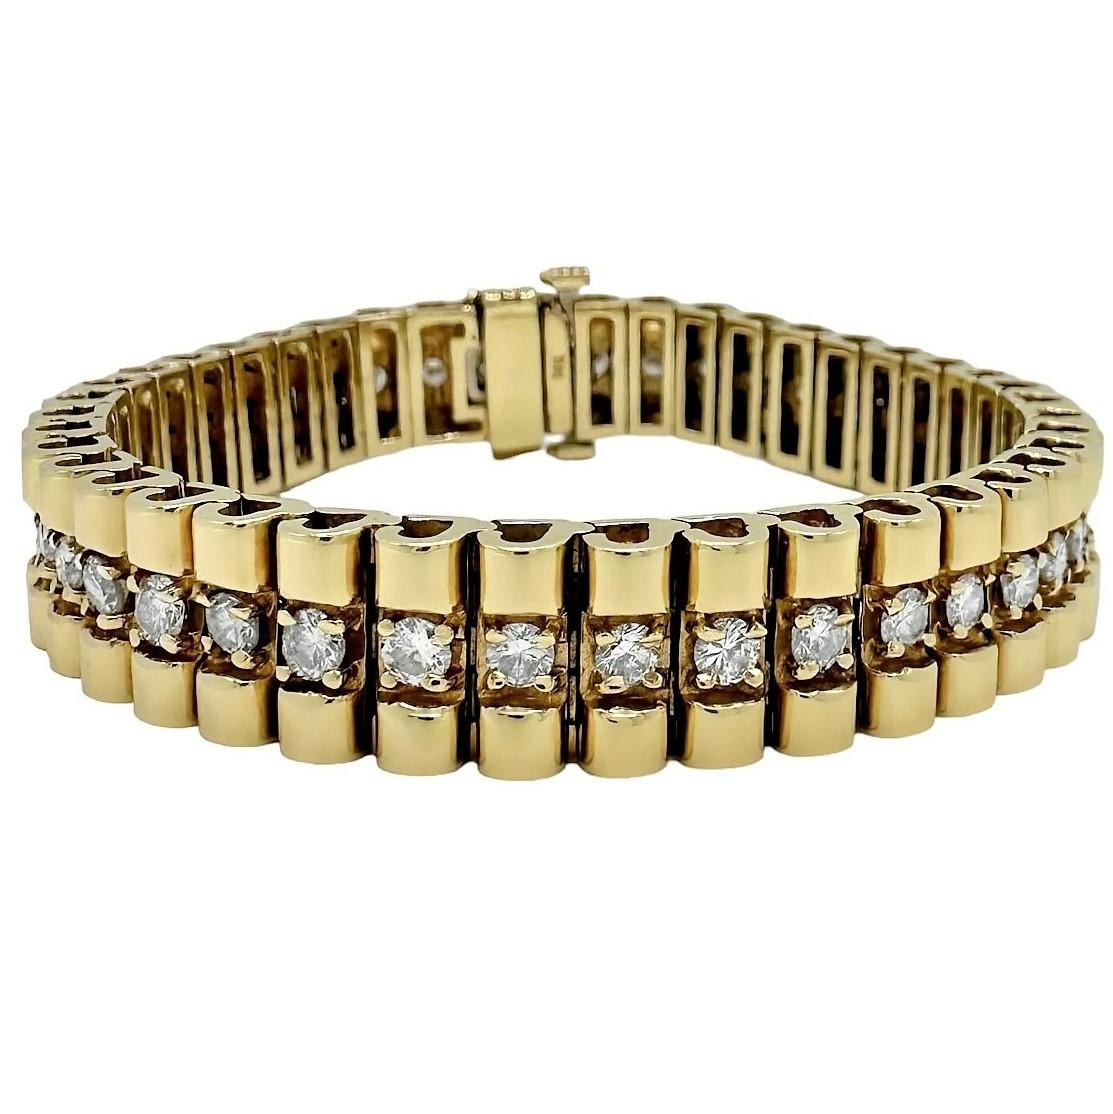 A sparkling, casual line bracelet, fabricated crisply from 14k yellow gold. A single line of forty-two round brilliant cut diamonds run the entire length and have a total approximate weight of 4.00ct. Overall diamond quality is H color and VS1-2